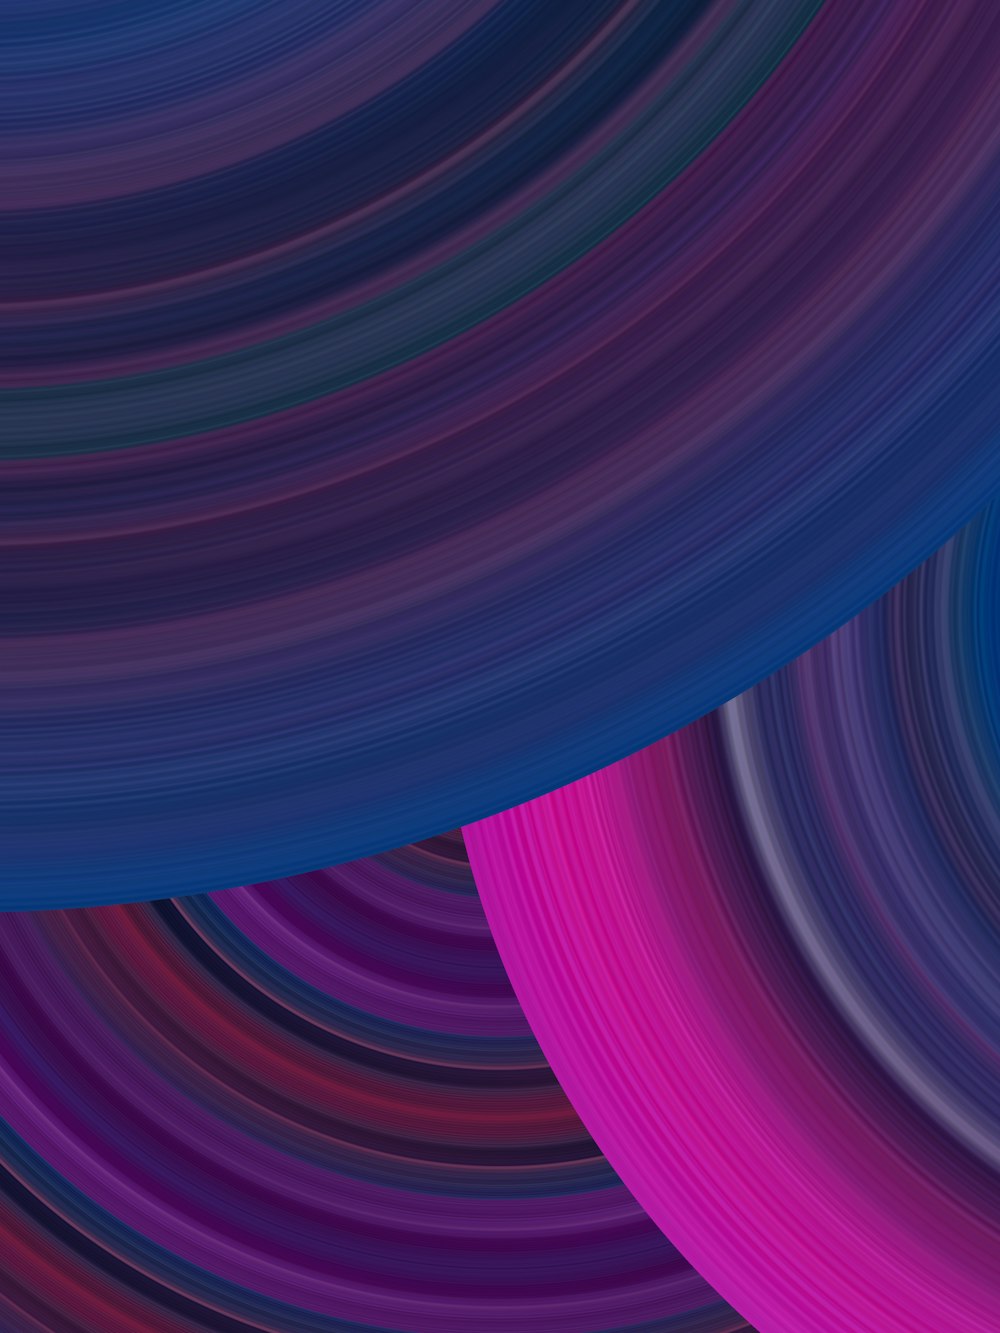 a purple and blue abstract background with curved lines